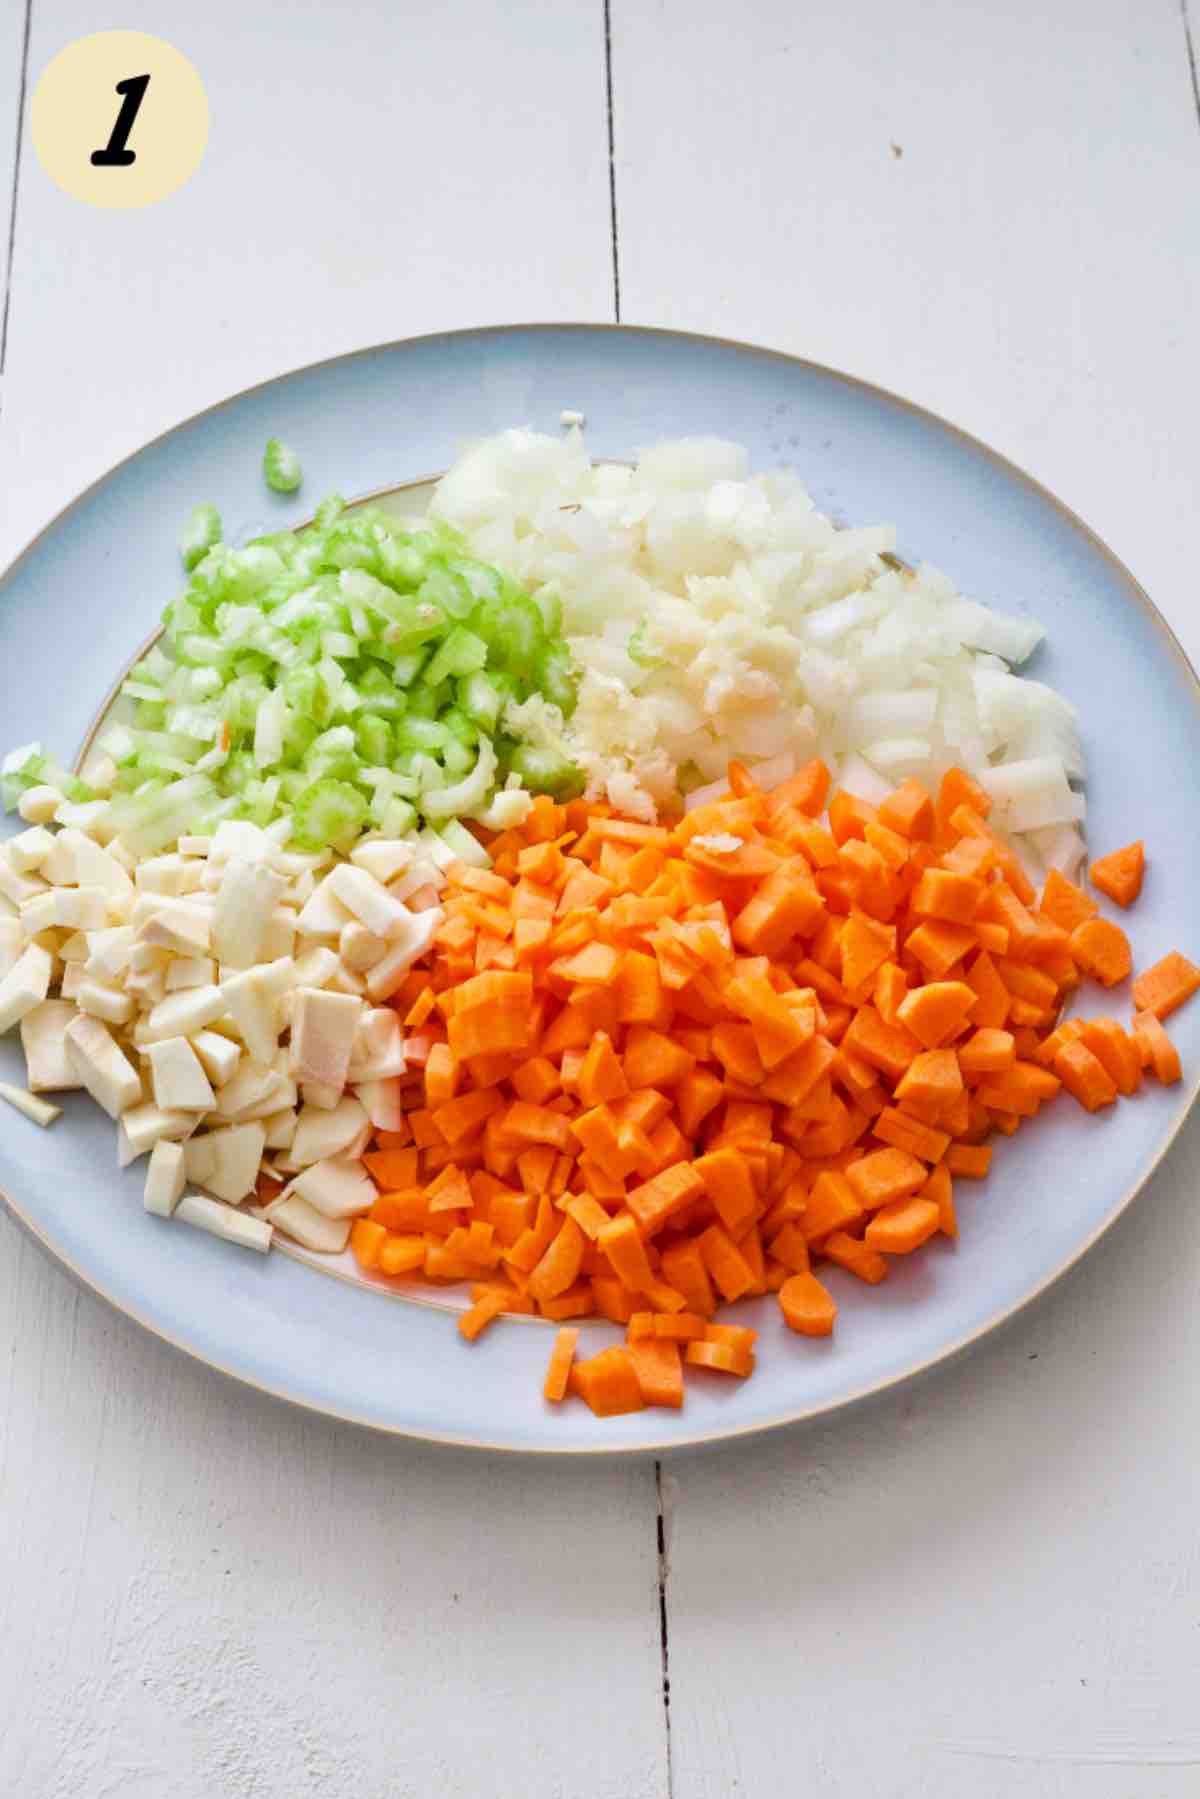 Plate with chopped onions, carrots, celery and parsnip.